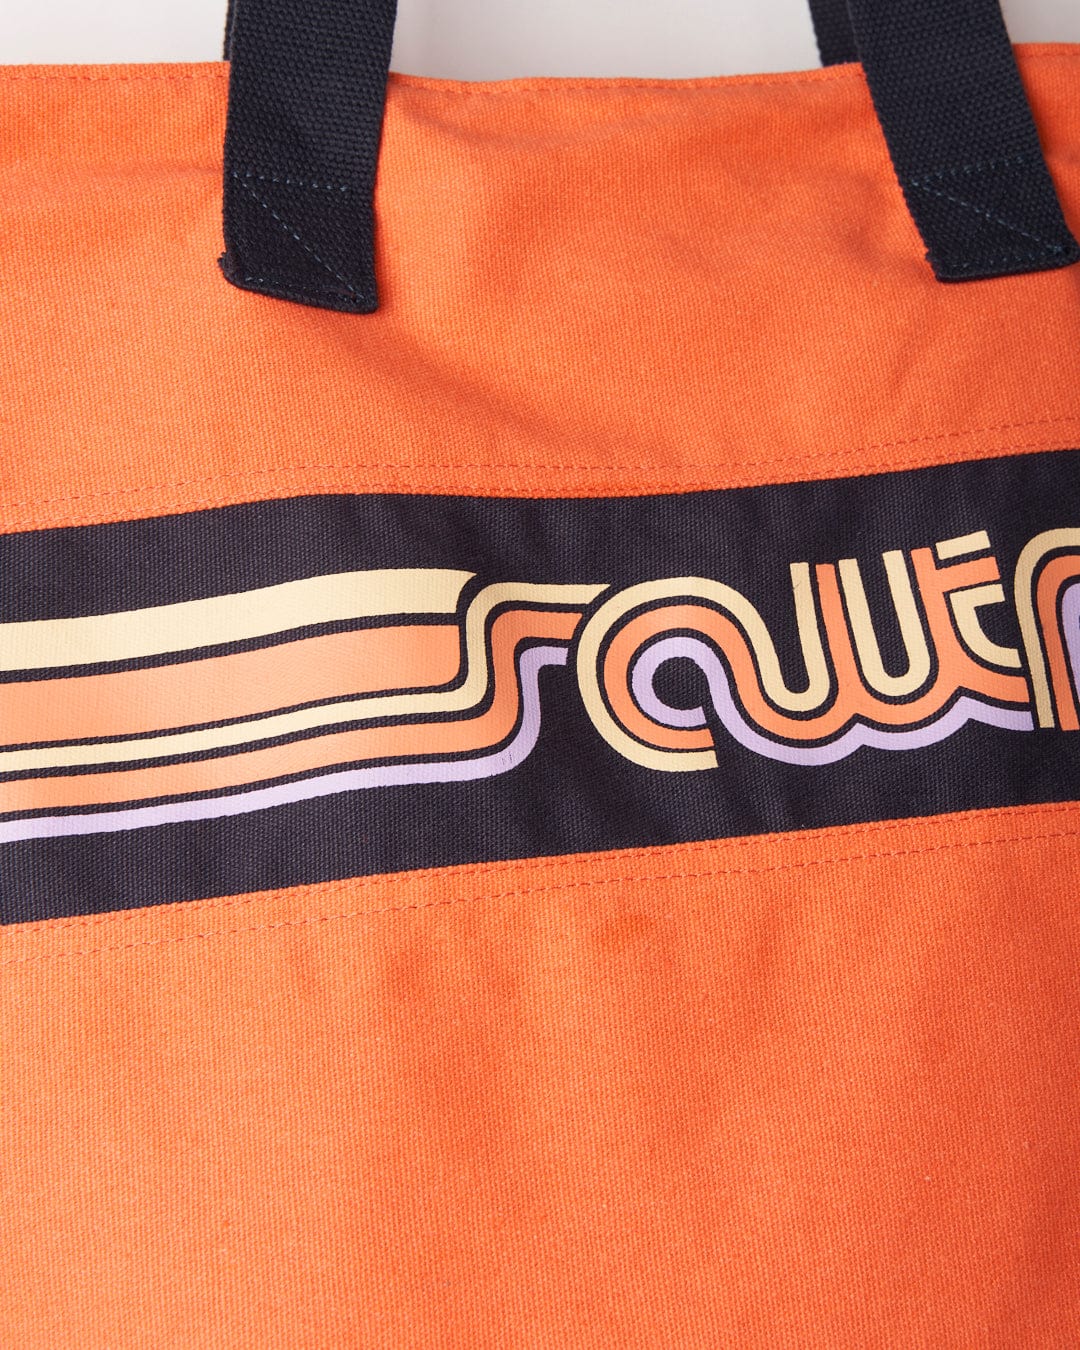 Close-up of a Cora Retro Beach Bag - Coral with a durable material and a striped Saltrock logo design.